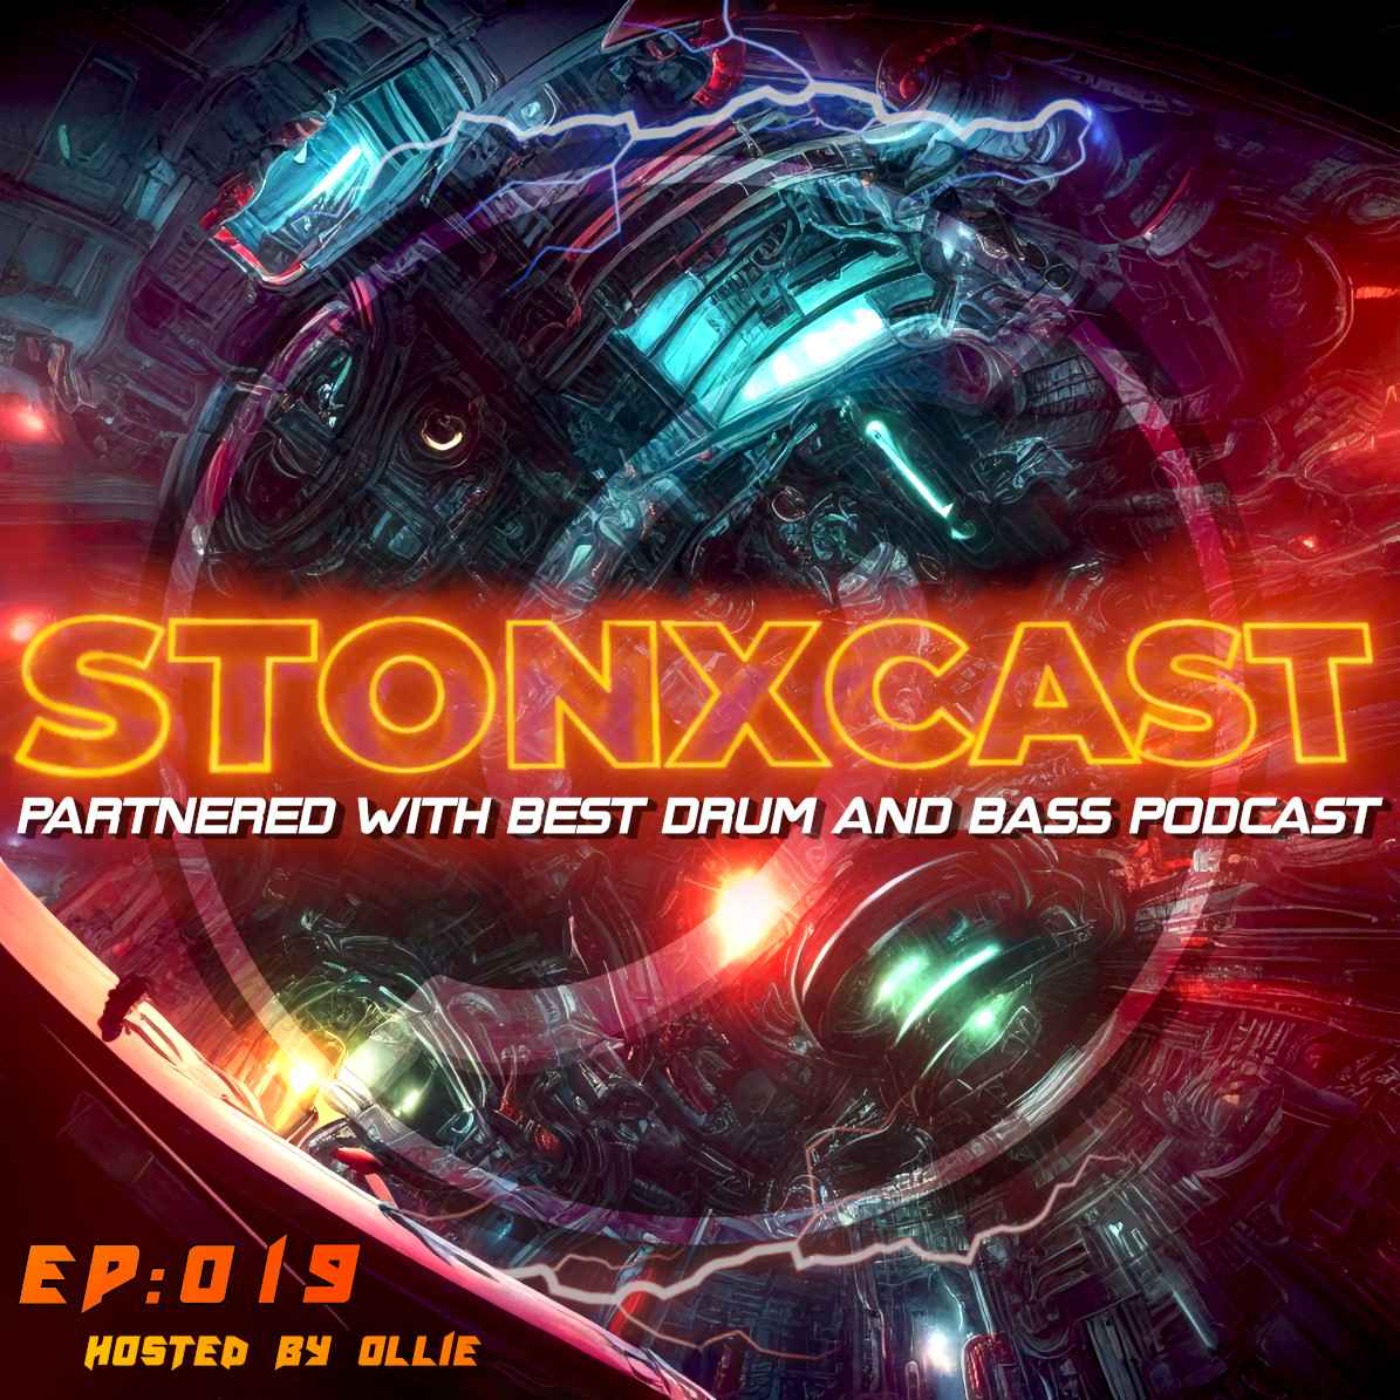 Stonxcast EP:019 - Hosted by Ollie Artwork